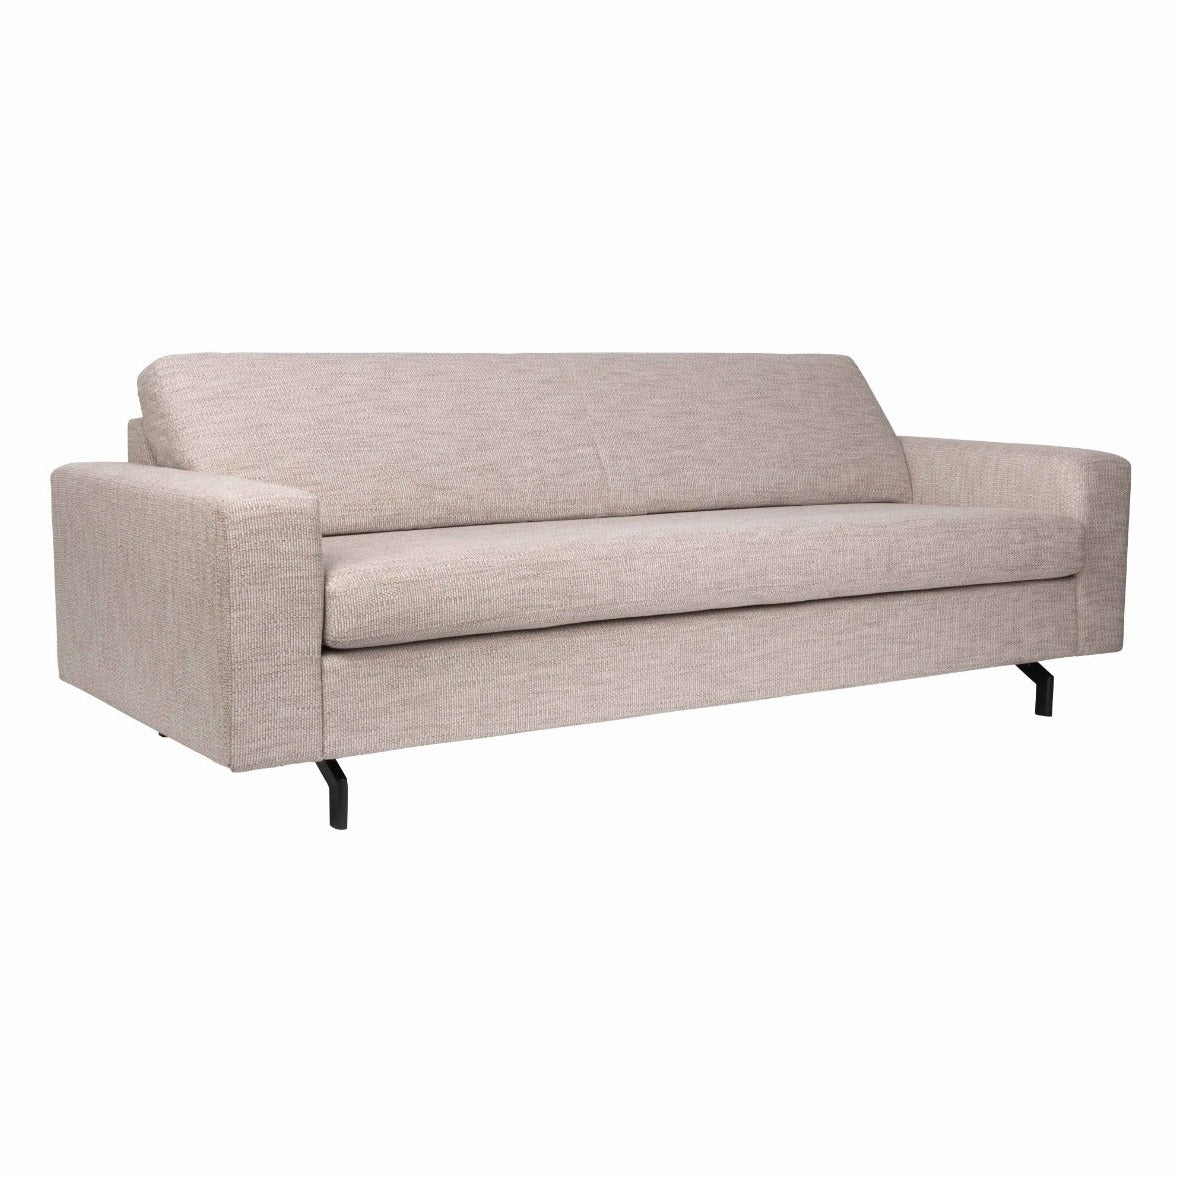 The Jean sofa is a piece of furniture from which simplicity beats, which is so rare nowadays. Its additional advantage is the elegance and comfort that it provides during use, which makes it great in a classic office and a minimalist living room. The cover is made of high quality fabric, thanks to which it provides unearthly softness. Small steel legs, which are barely noticeable, give it even more style.